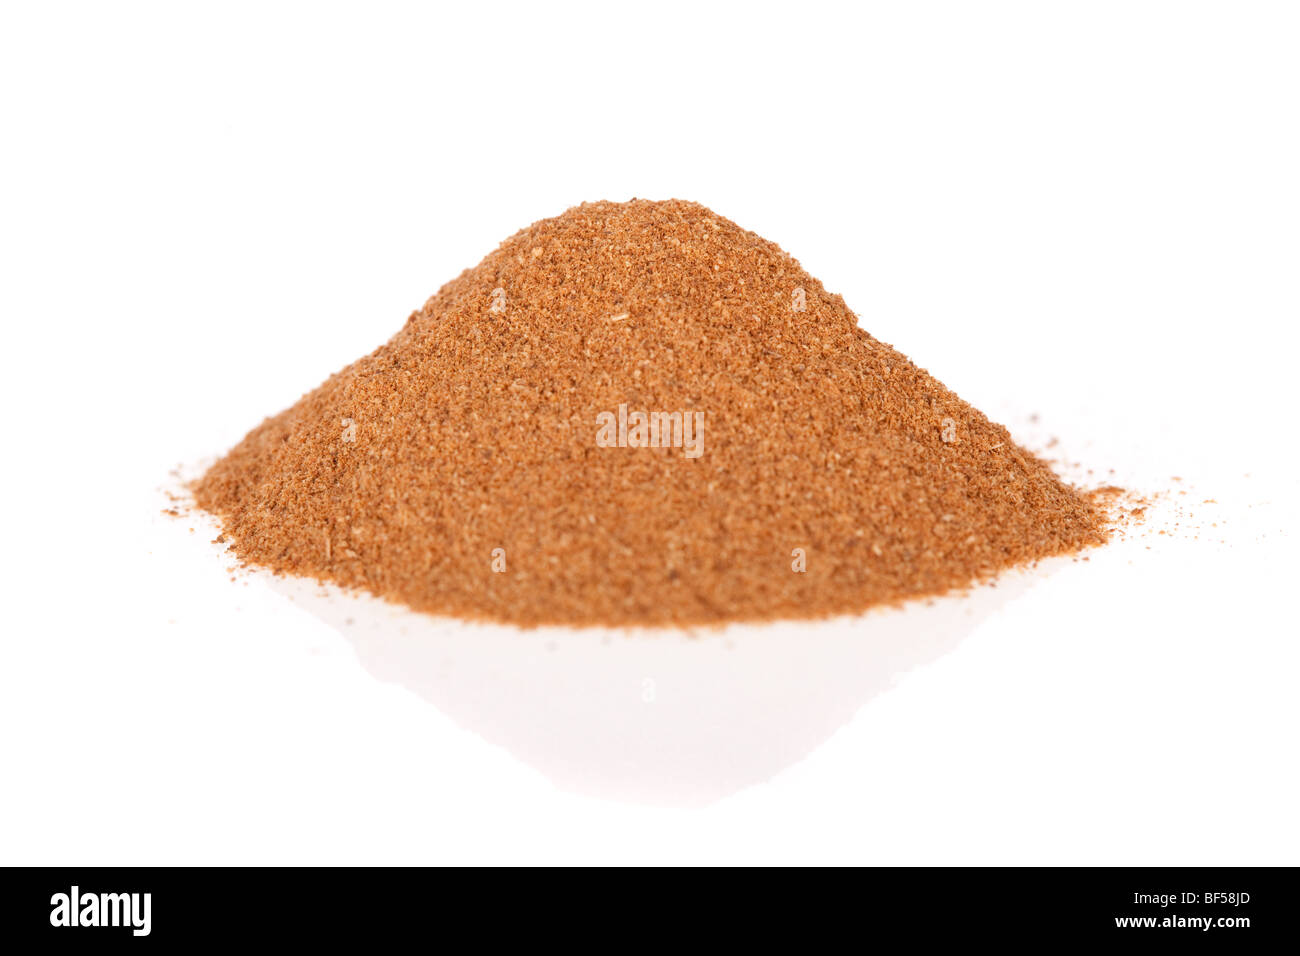 Cinnamon ground isolated on a white background Stock Photo